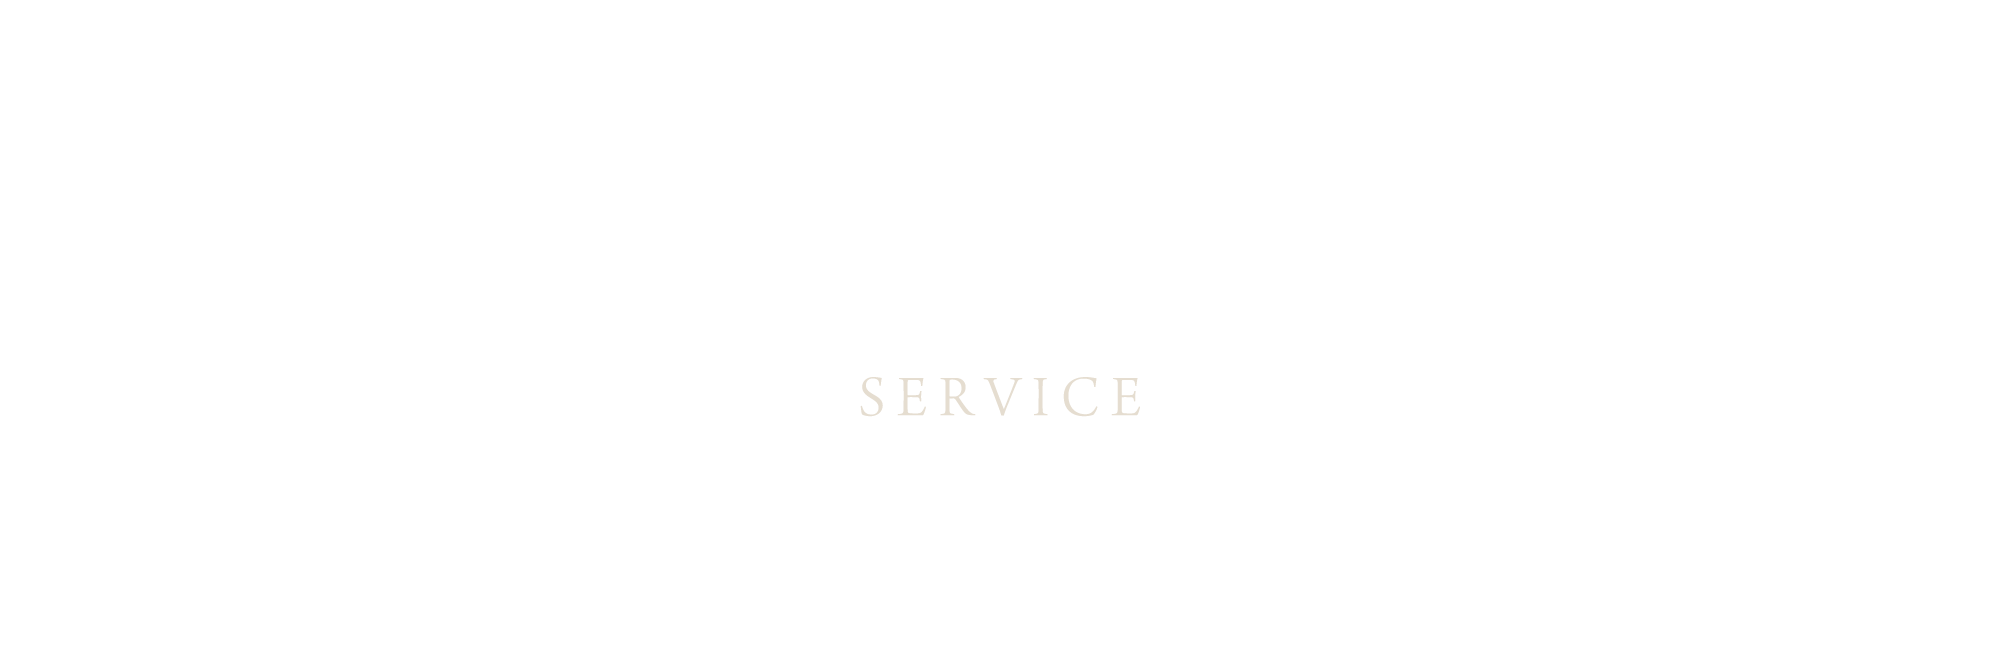 Time’s SERVICE